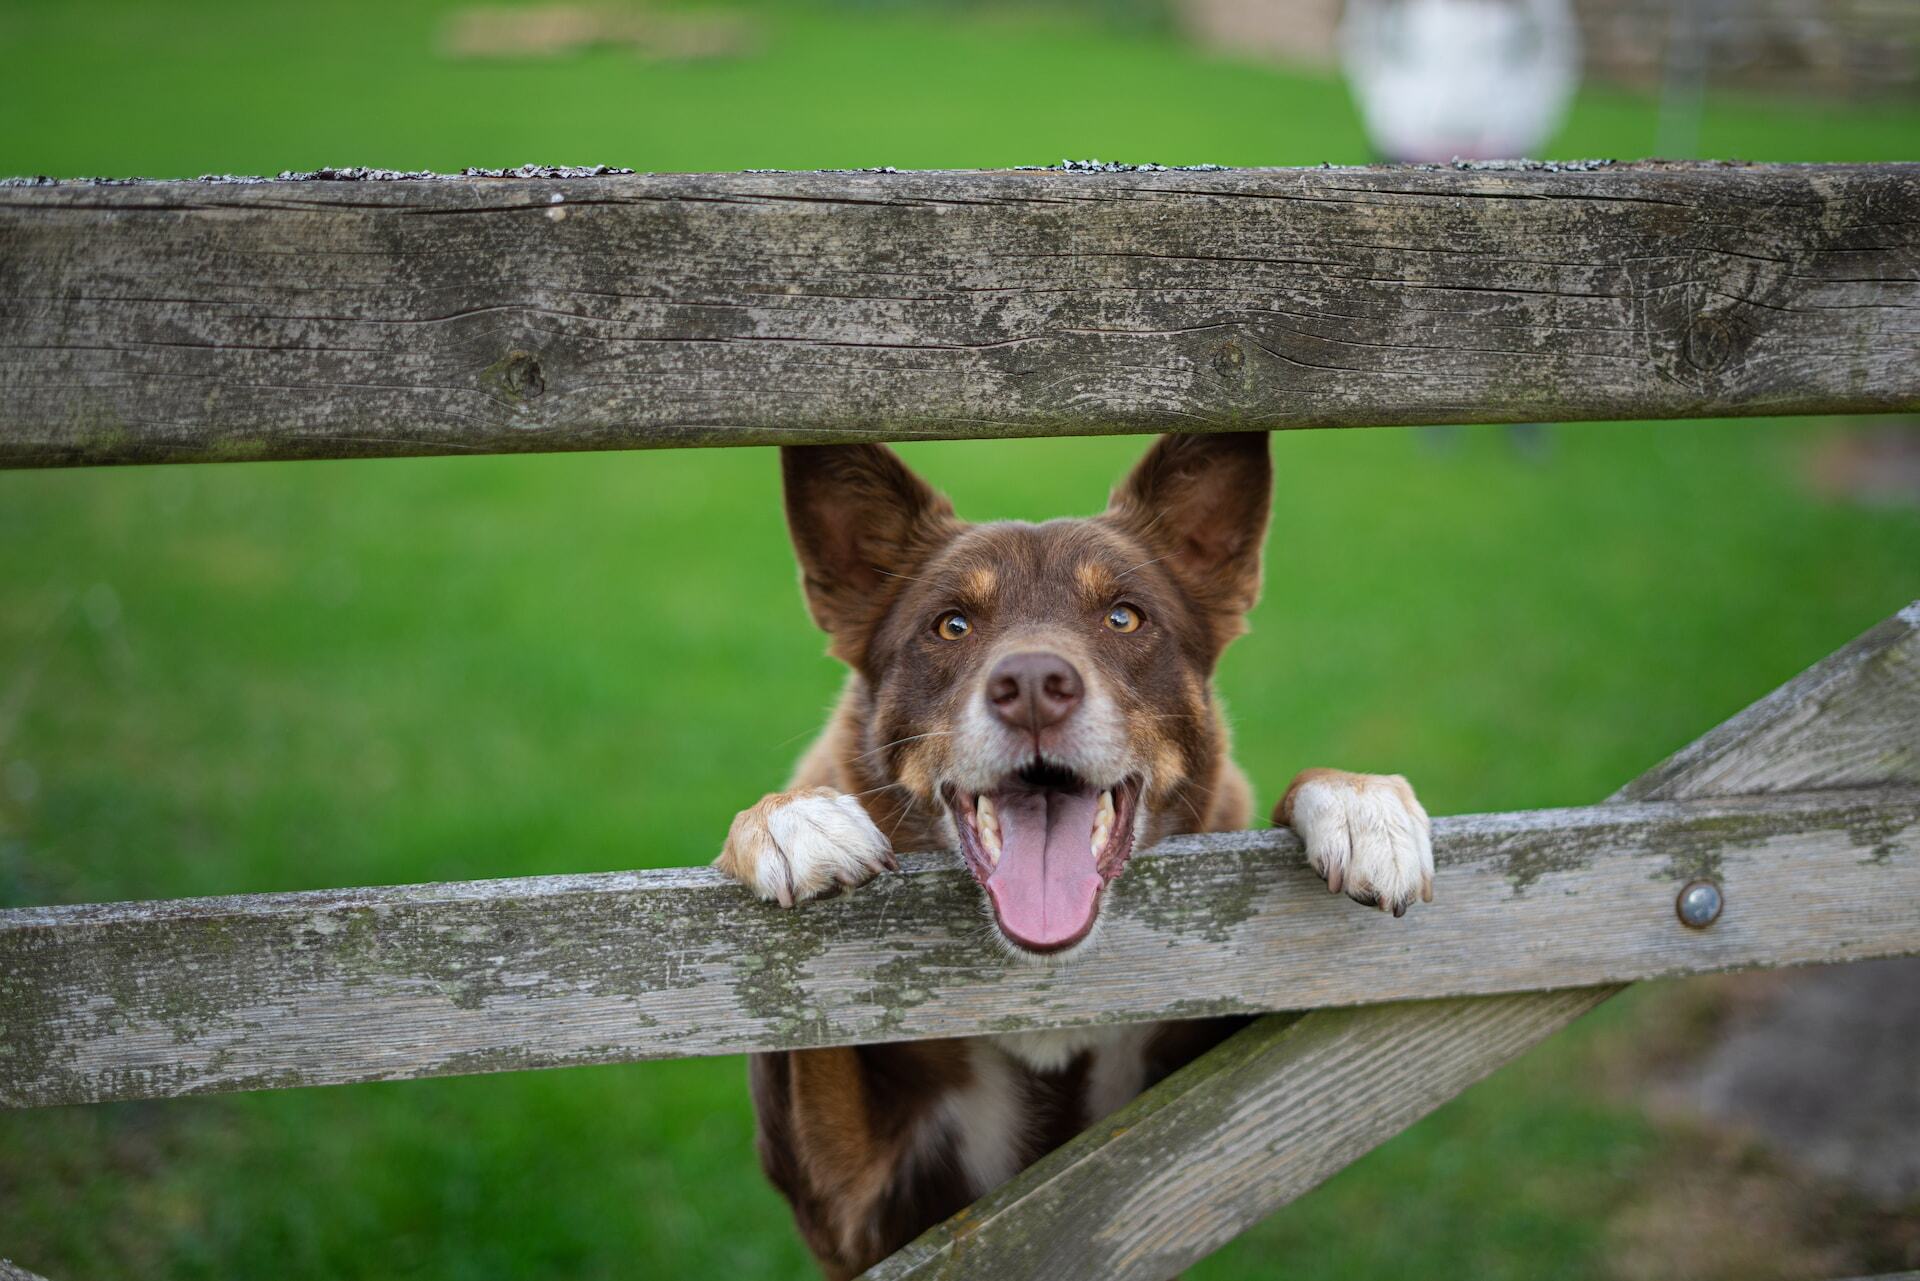 A dog peeking from between the slats of a wooden fence